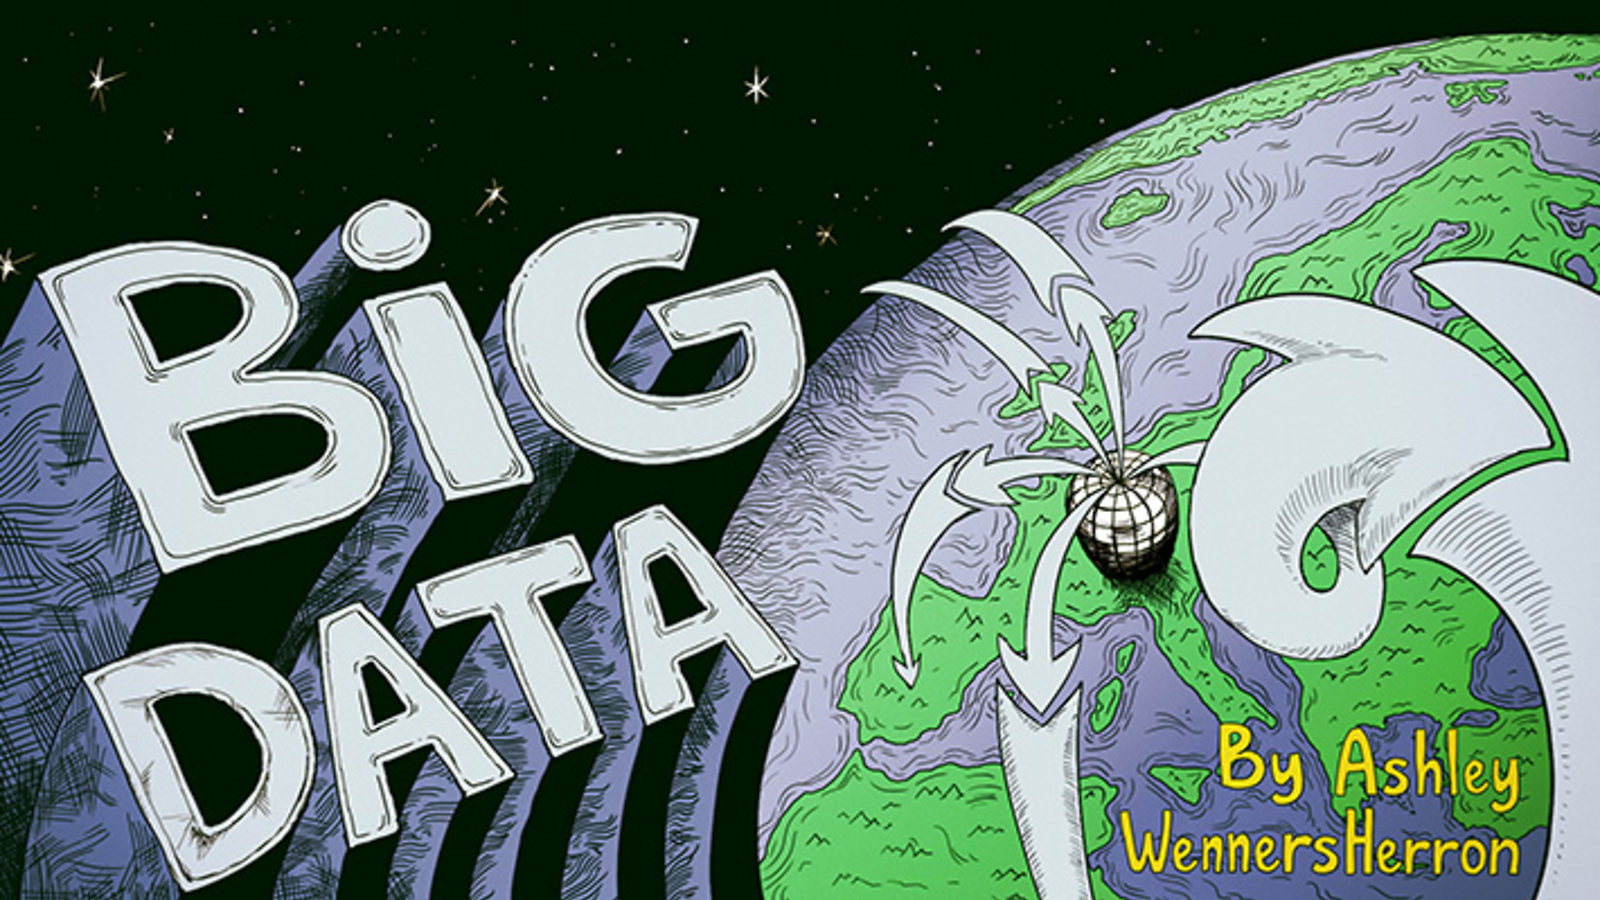 Illustration of planet in space "Big Data" written